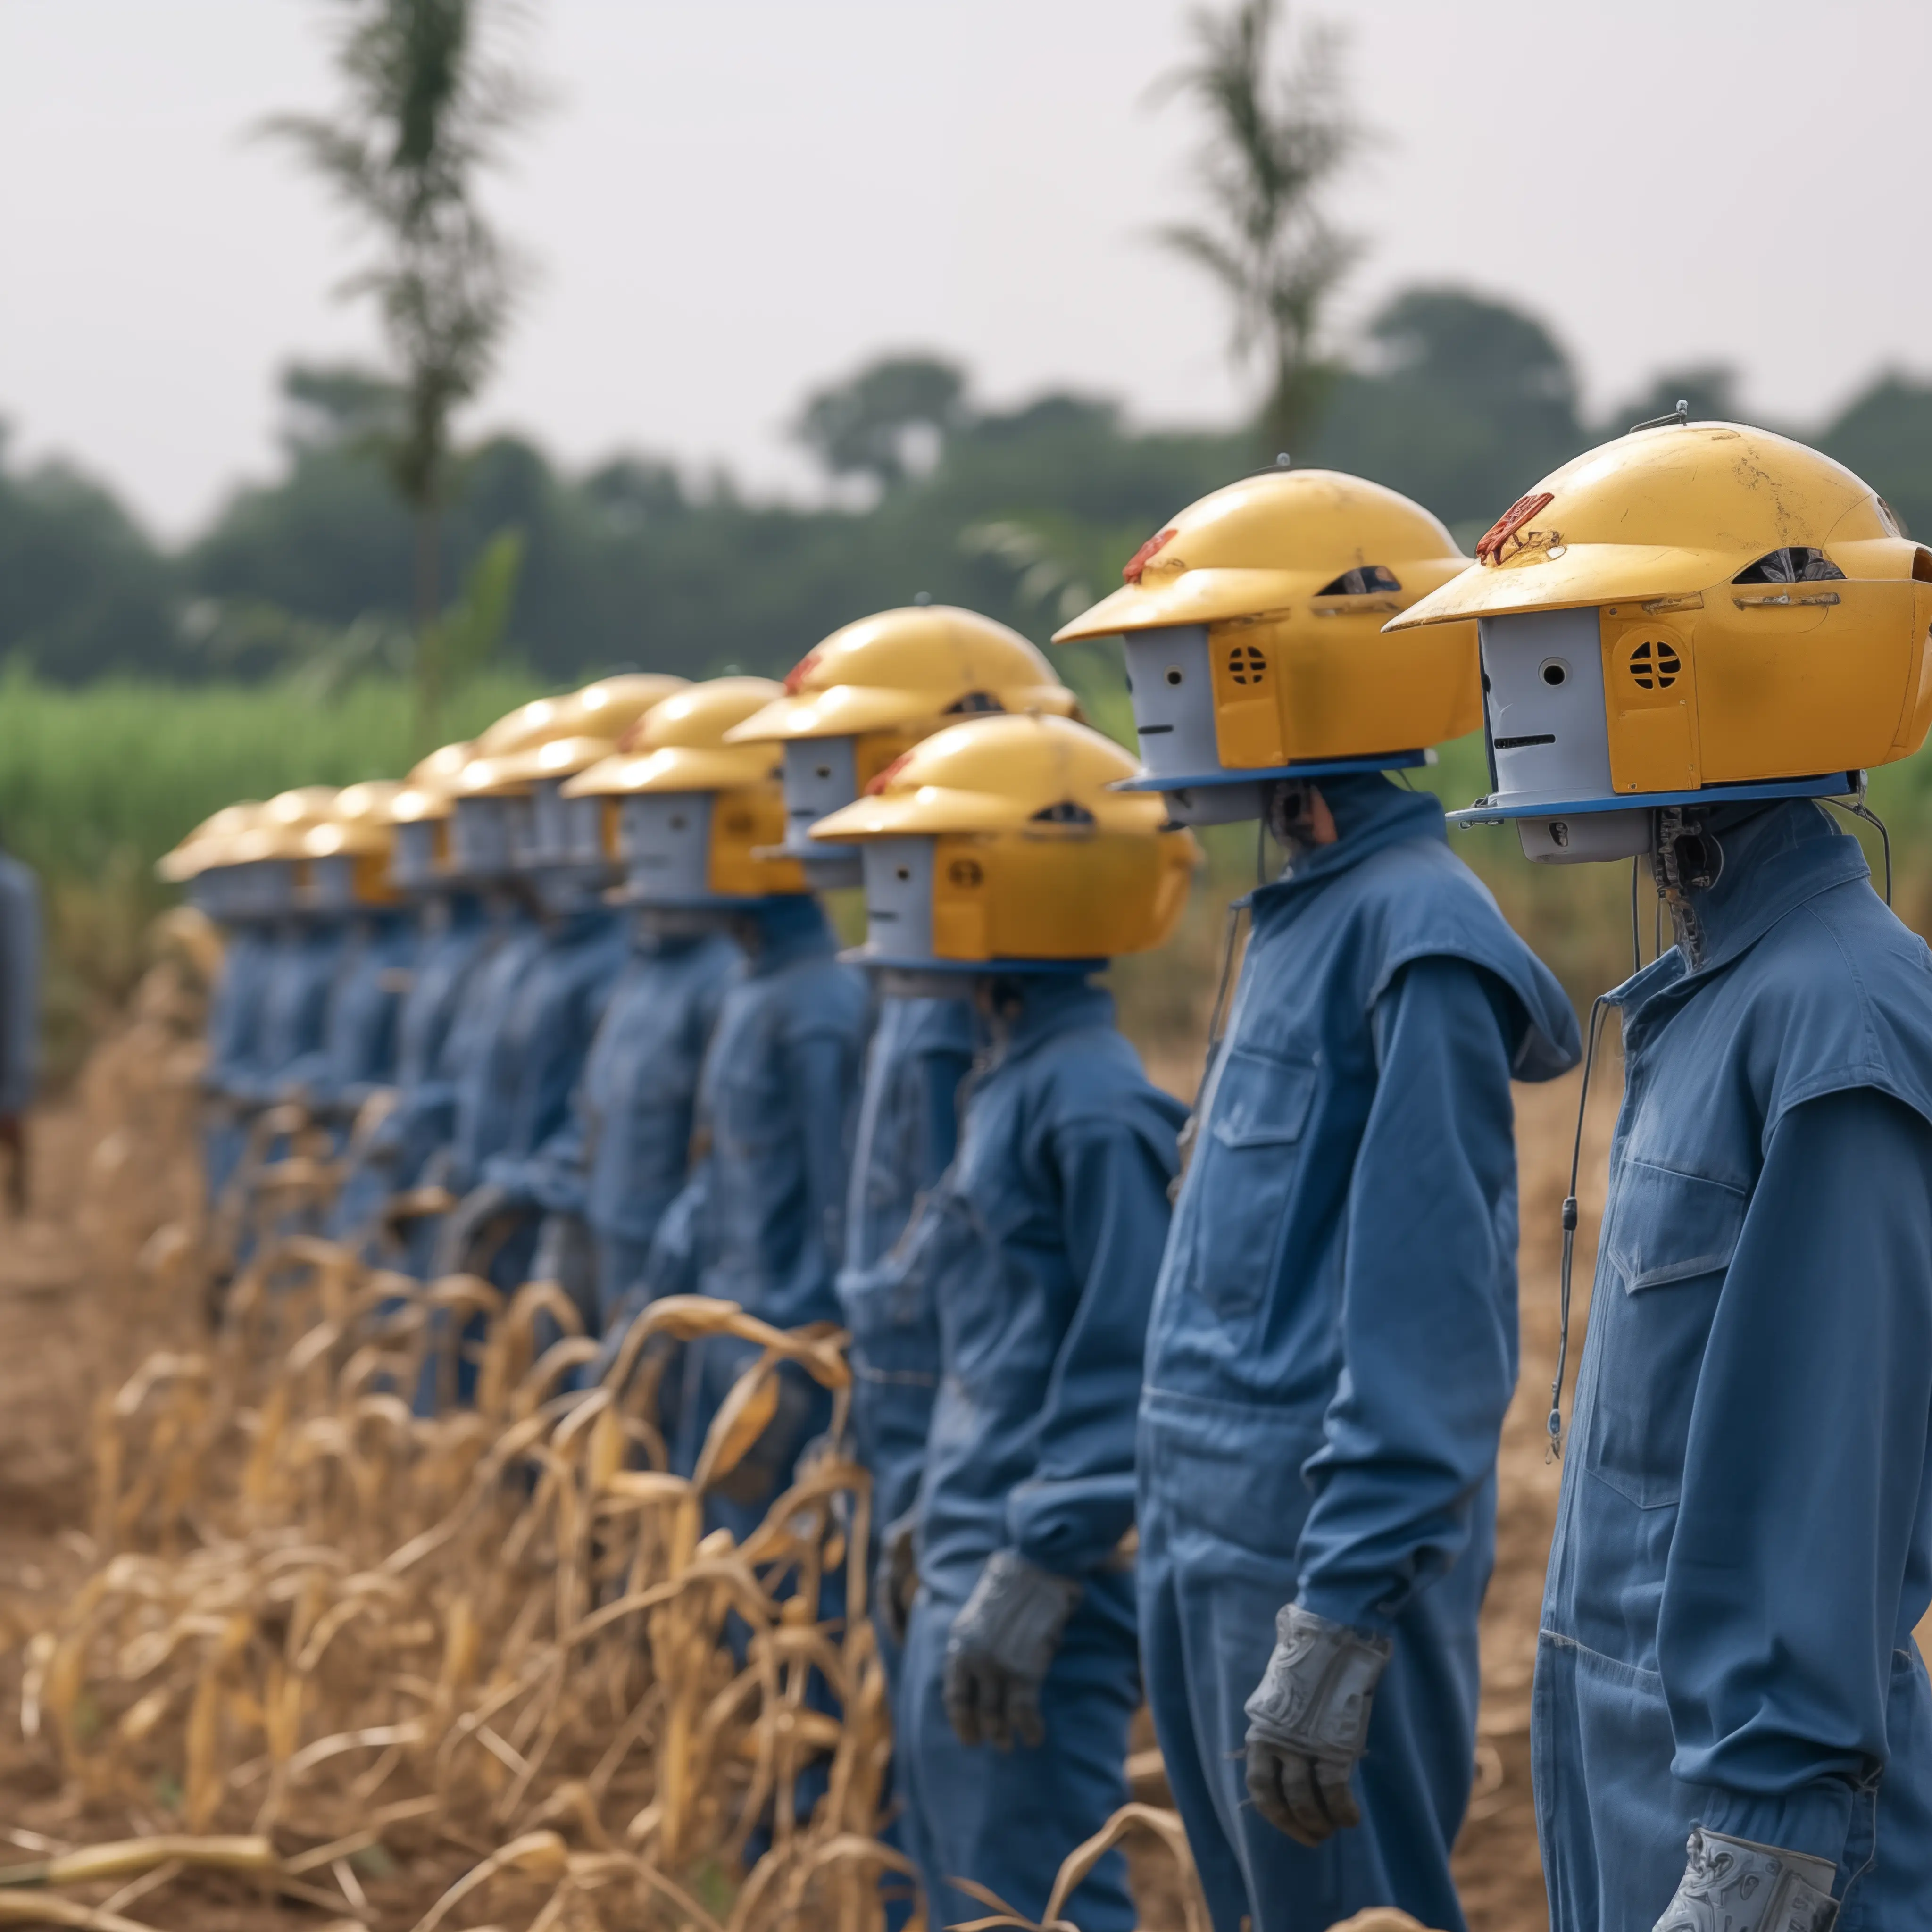 A group of Chives farming robots with yellow helmets and blue overalls standing in a field of wheat. Made by XomTek